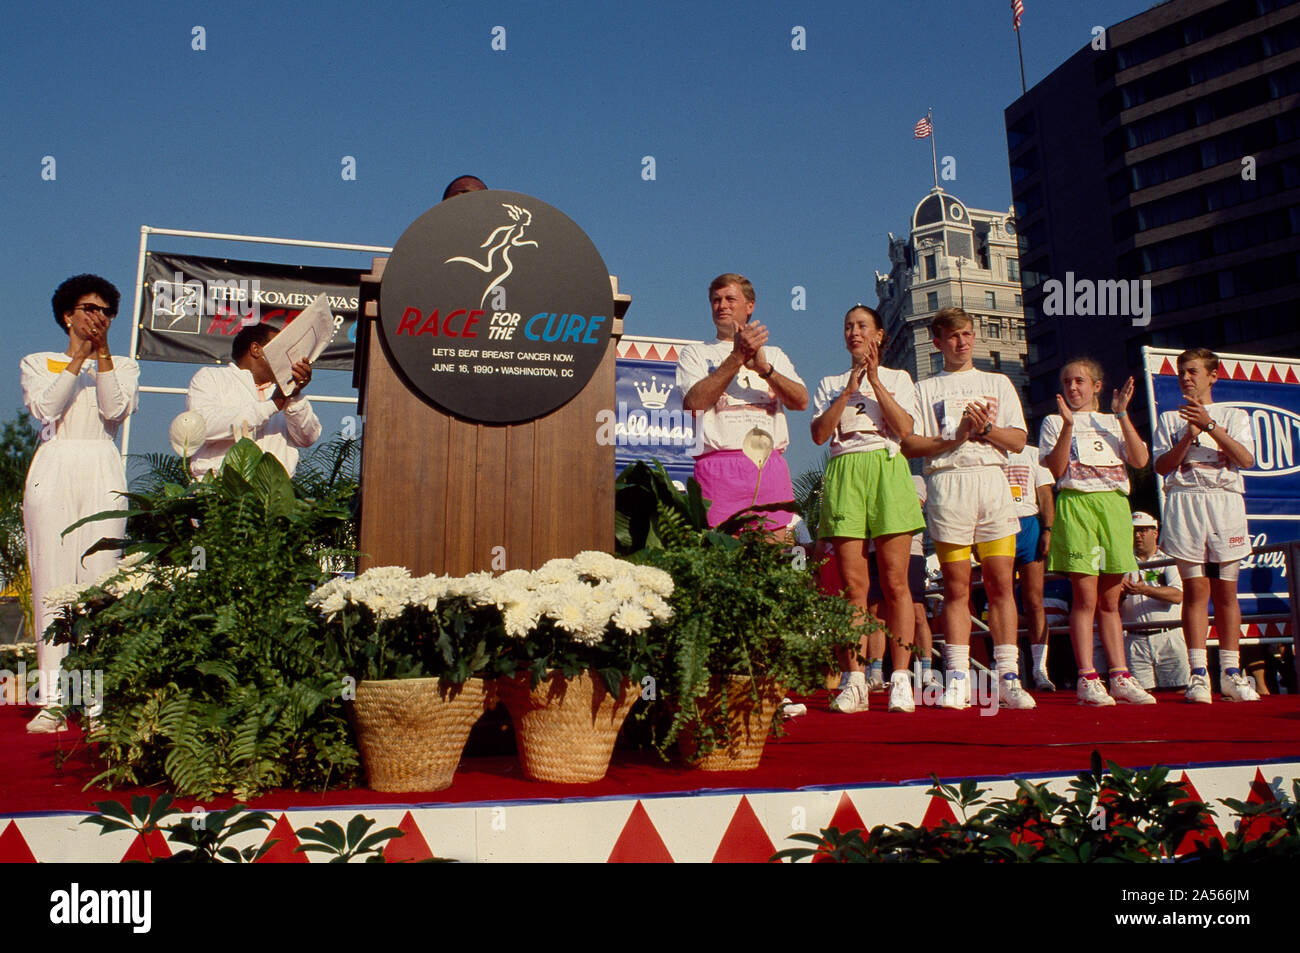 Vice President Dan Quayle and Second Lady Marilyn Quayle, to the right of the podium, at a Race for the (Cancer) Cure run in 1990, Washington, D.C Stock Photo